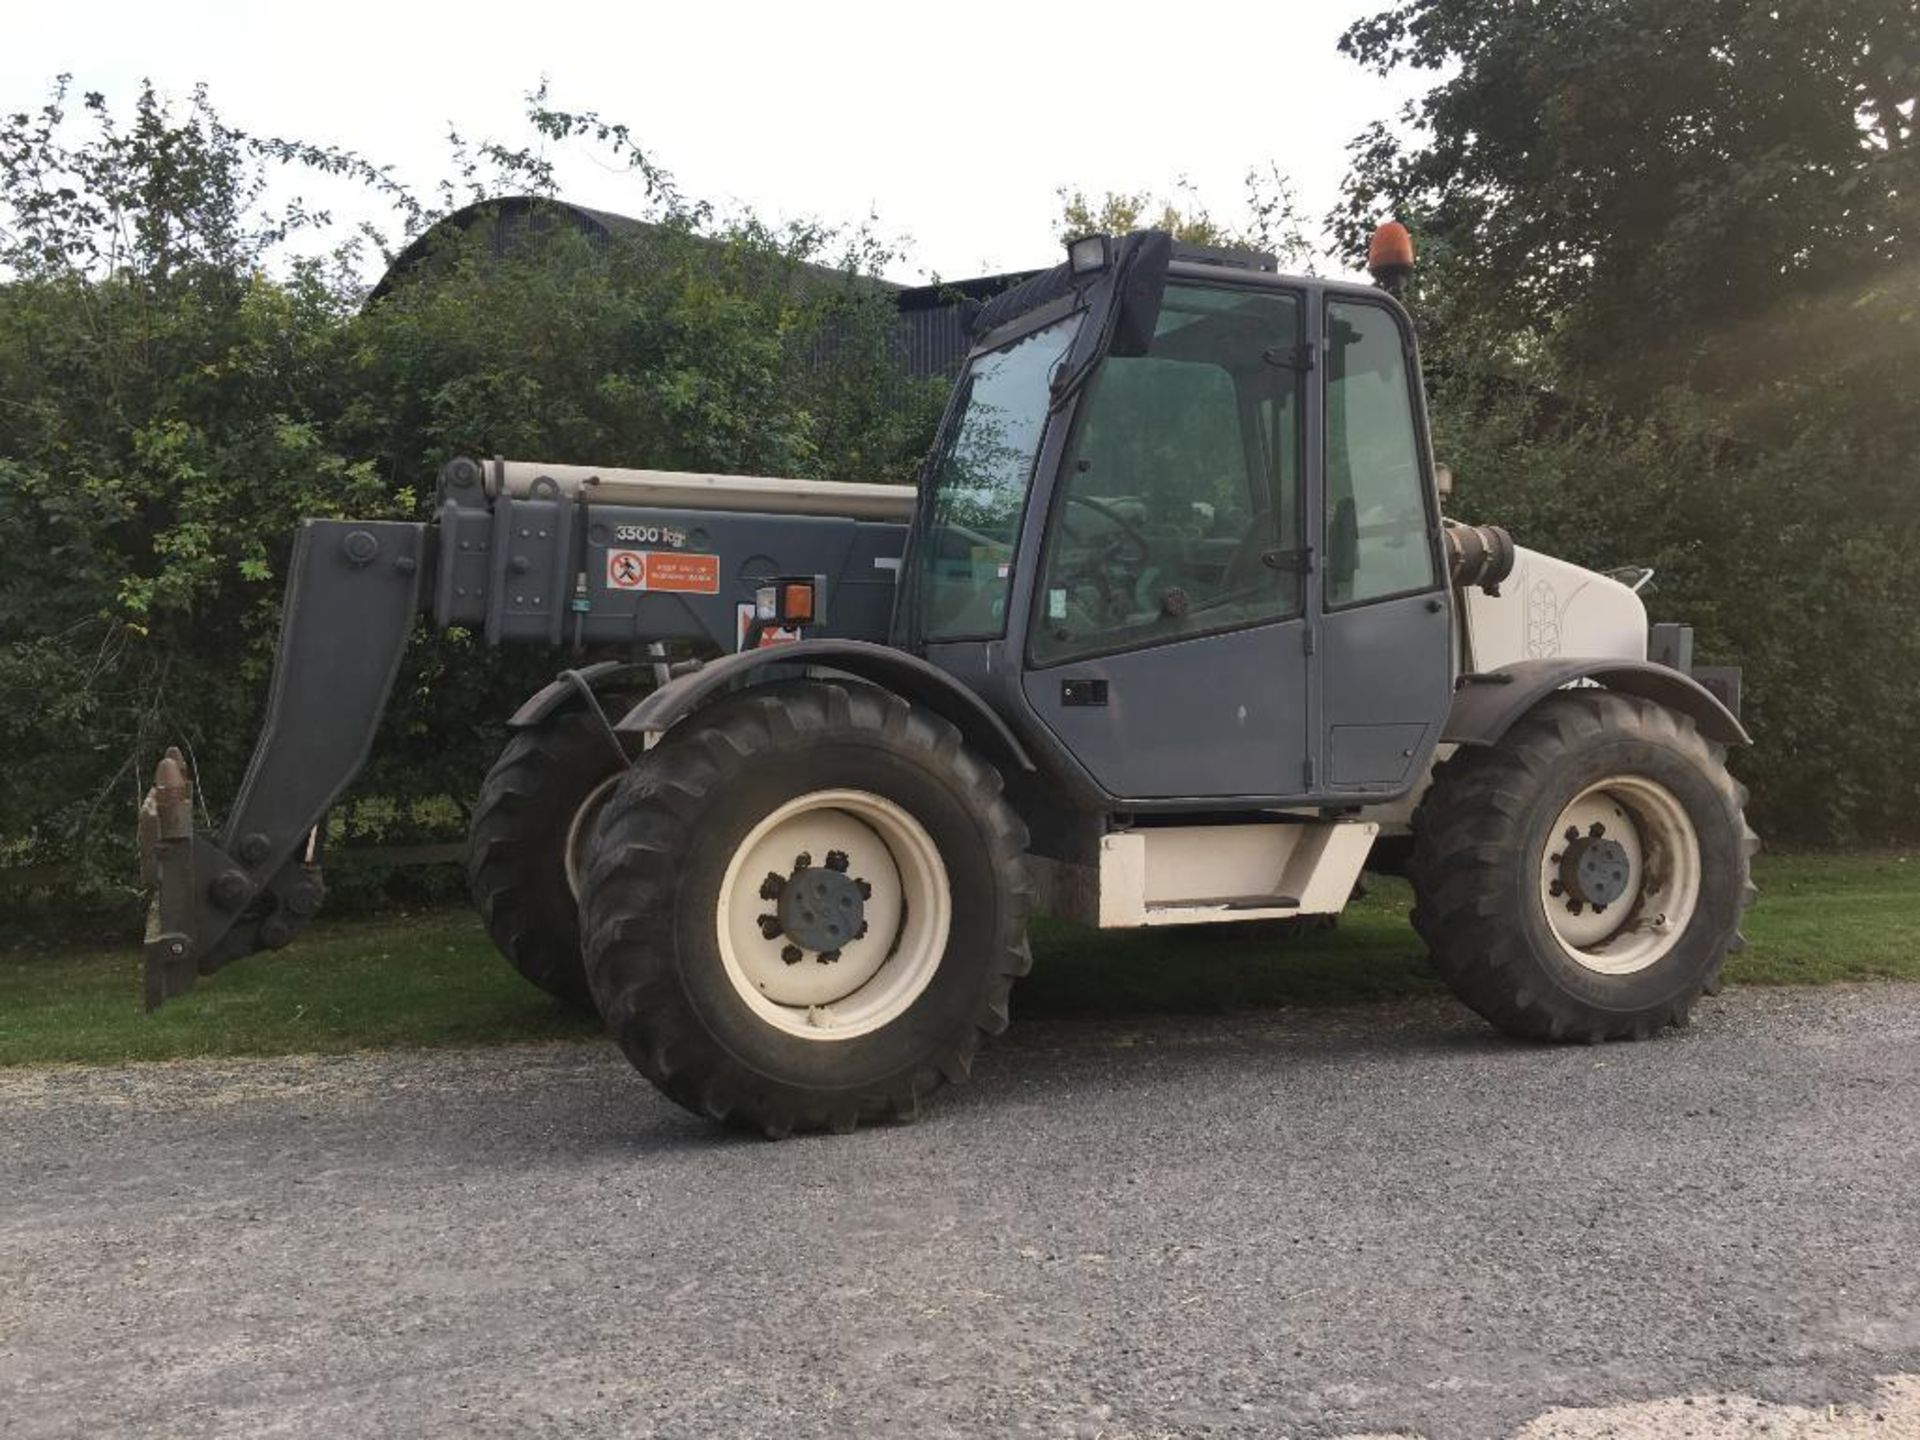 2000 Terex Agri lift 359 materials handler with pin and cone headstock, rear pick up hitch on 15.5/8 - Image 2 of 7